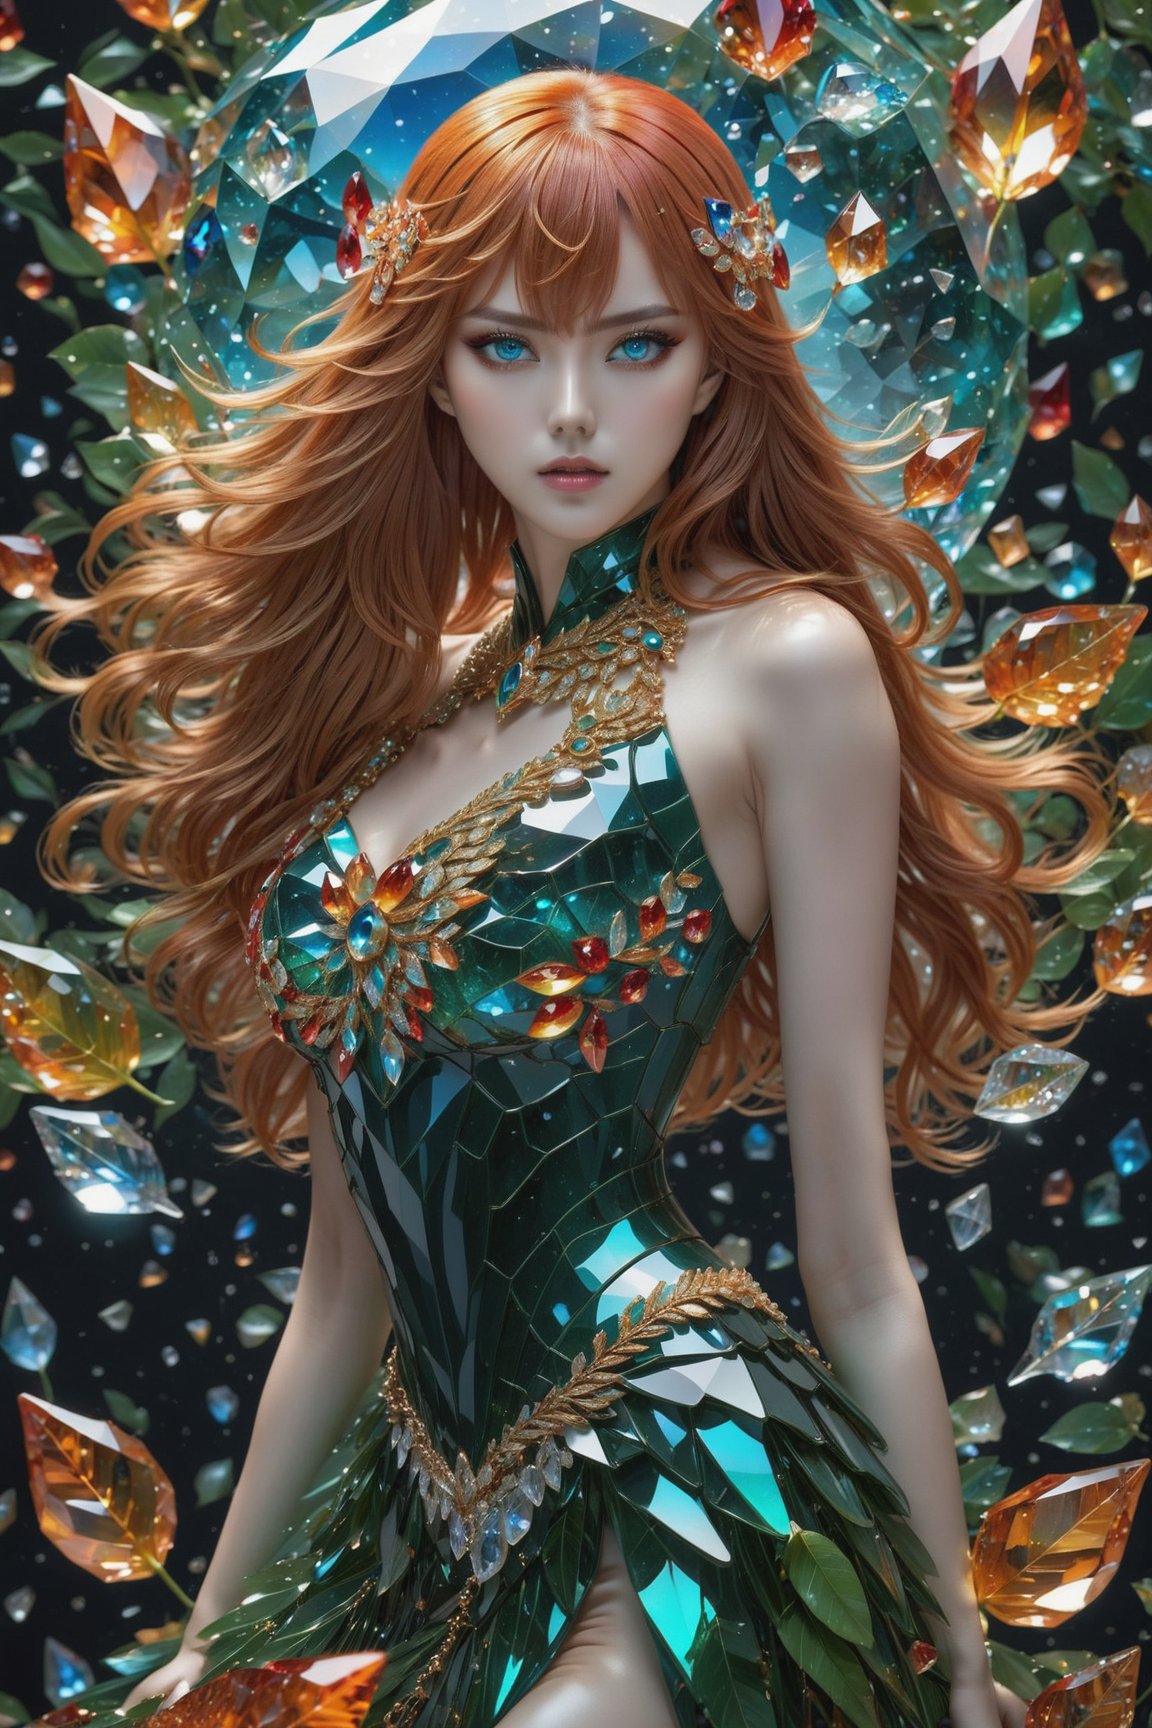 Asuka Langley Soryu adorned in a dazzling fantasy-inspired glass fantasy asymmetric dress, includes an eye-covering mask, perfect skin, Broken Glass effect, no background, stunning, something that even doesn't exist, eyes shoot,oil paint, crystal_clear, crystals made out of leaves, skpleonardostyle,